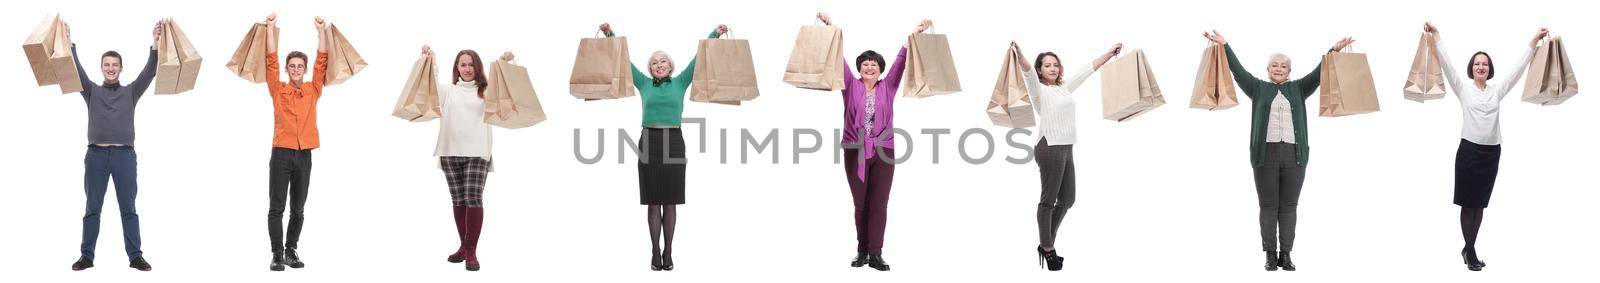 a group of people are running paper shopping bags by asdf